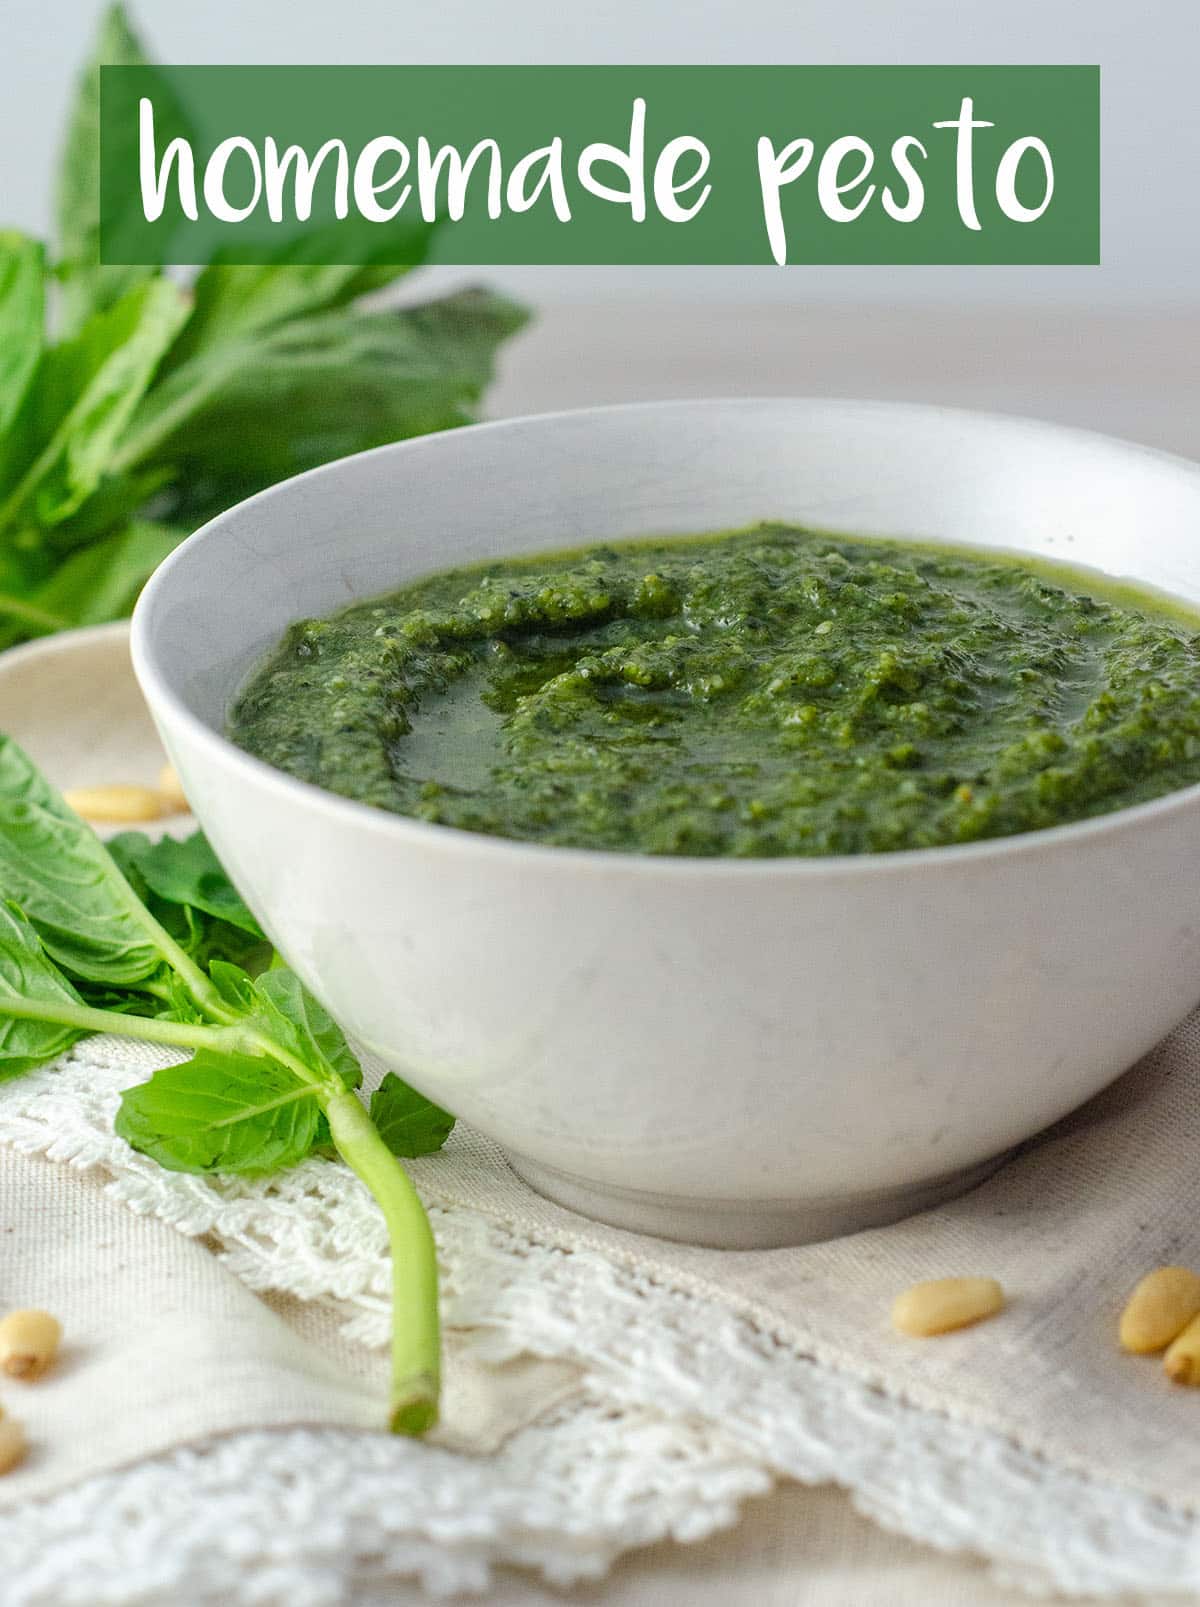 Homemade Pesto: Making your own herby, garlicy pesto at home is as easy as throwing FIVE ingredients into a food processor.  via @frshaprilflours